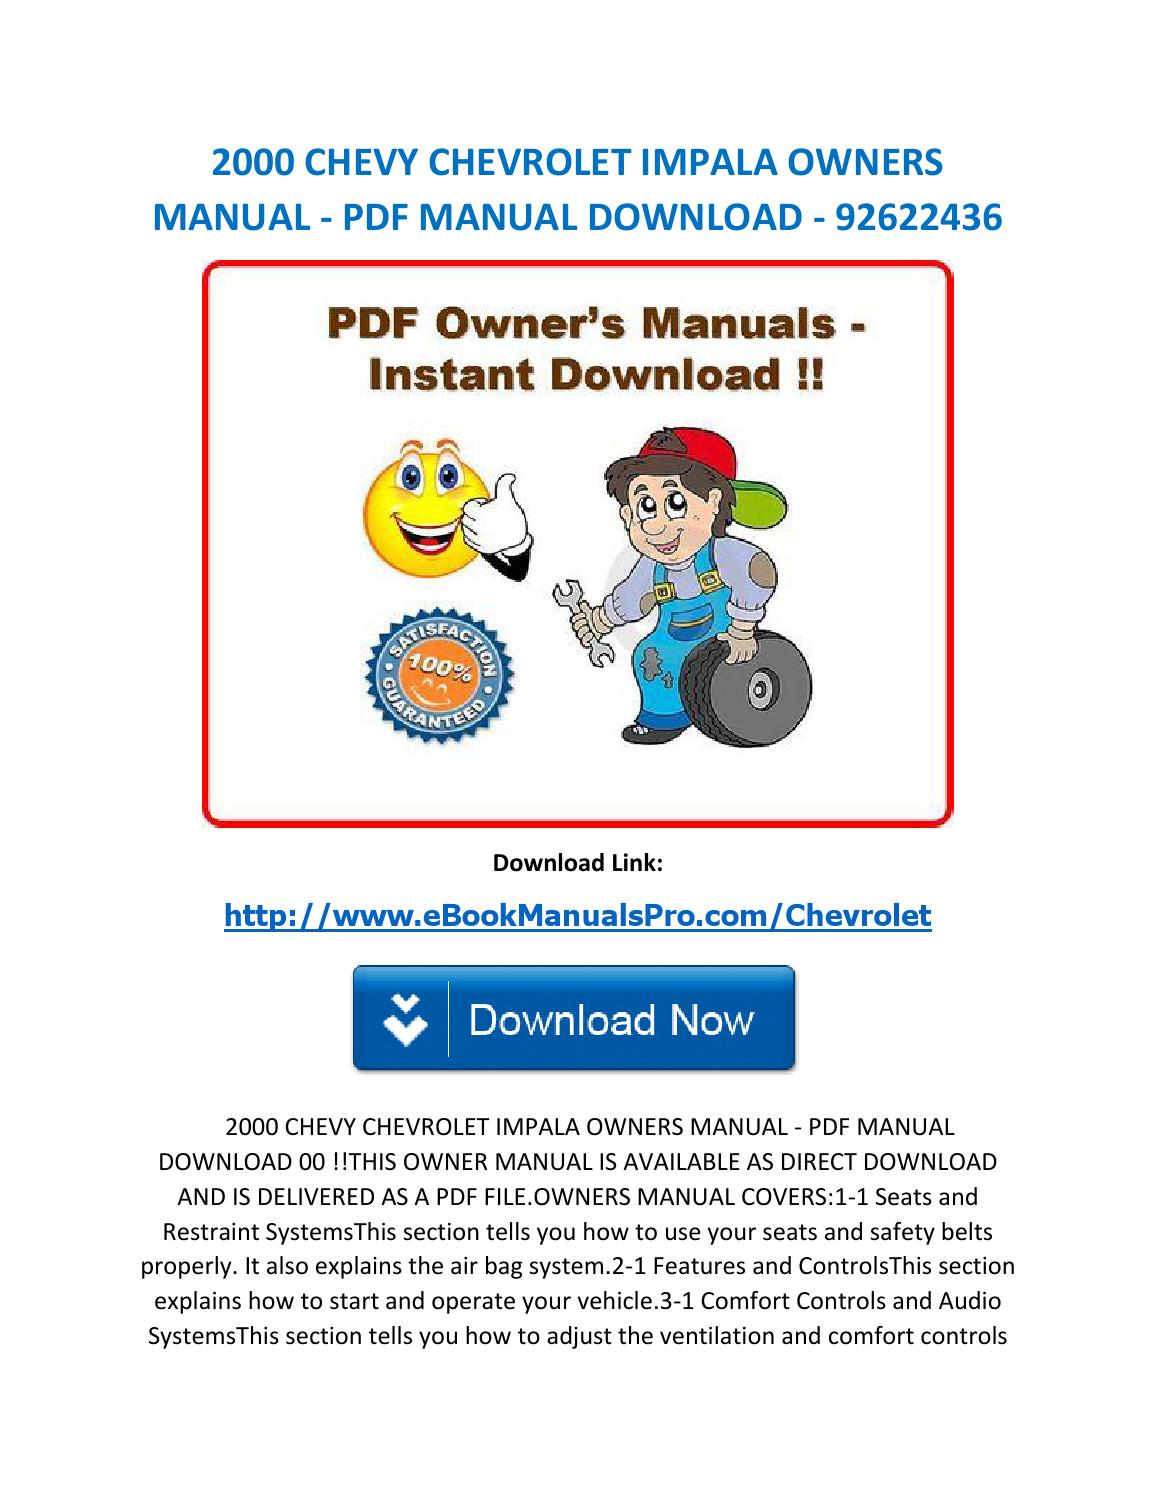 2003 Chevy Impala Owners Manual Download